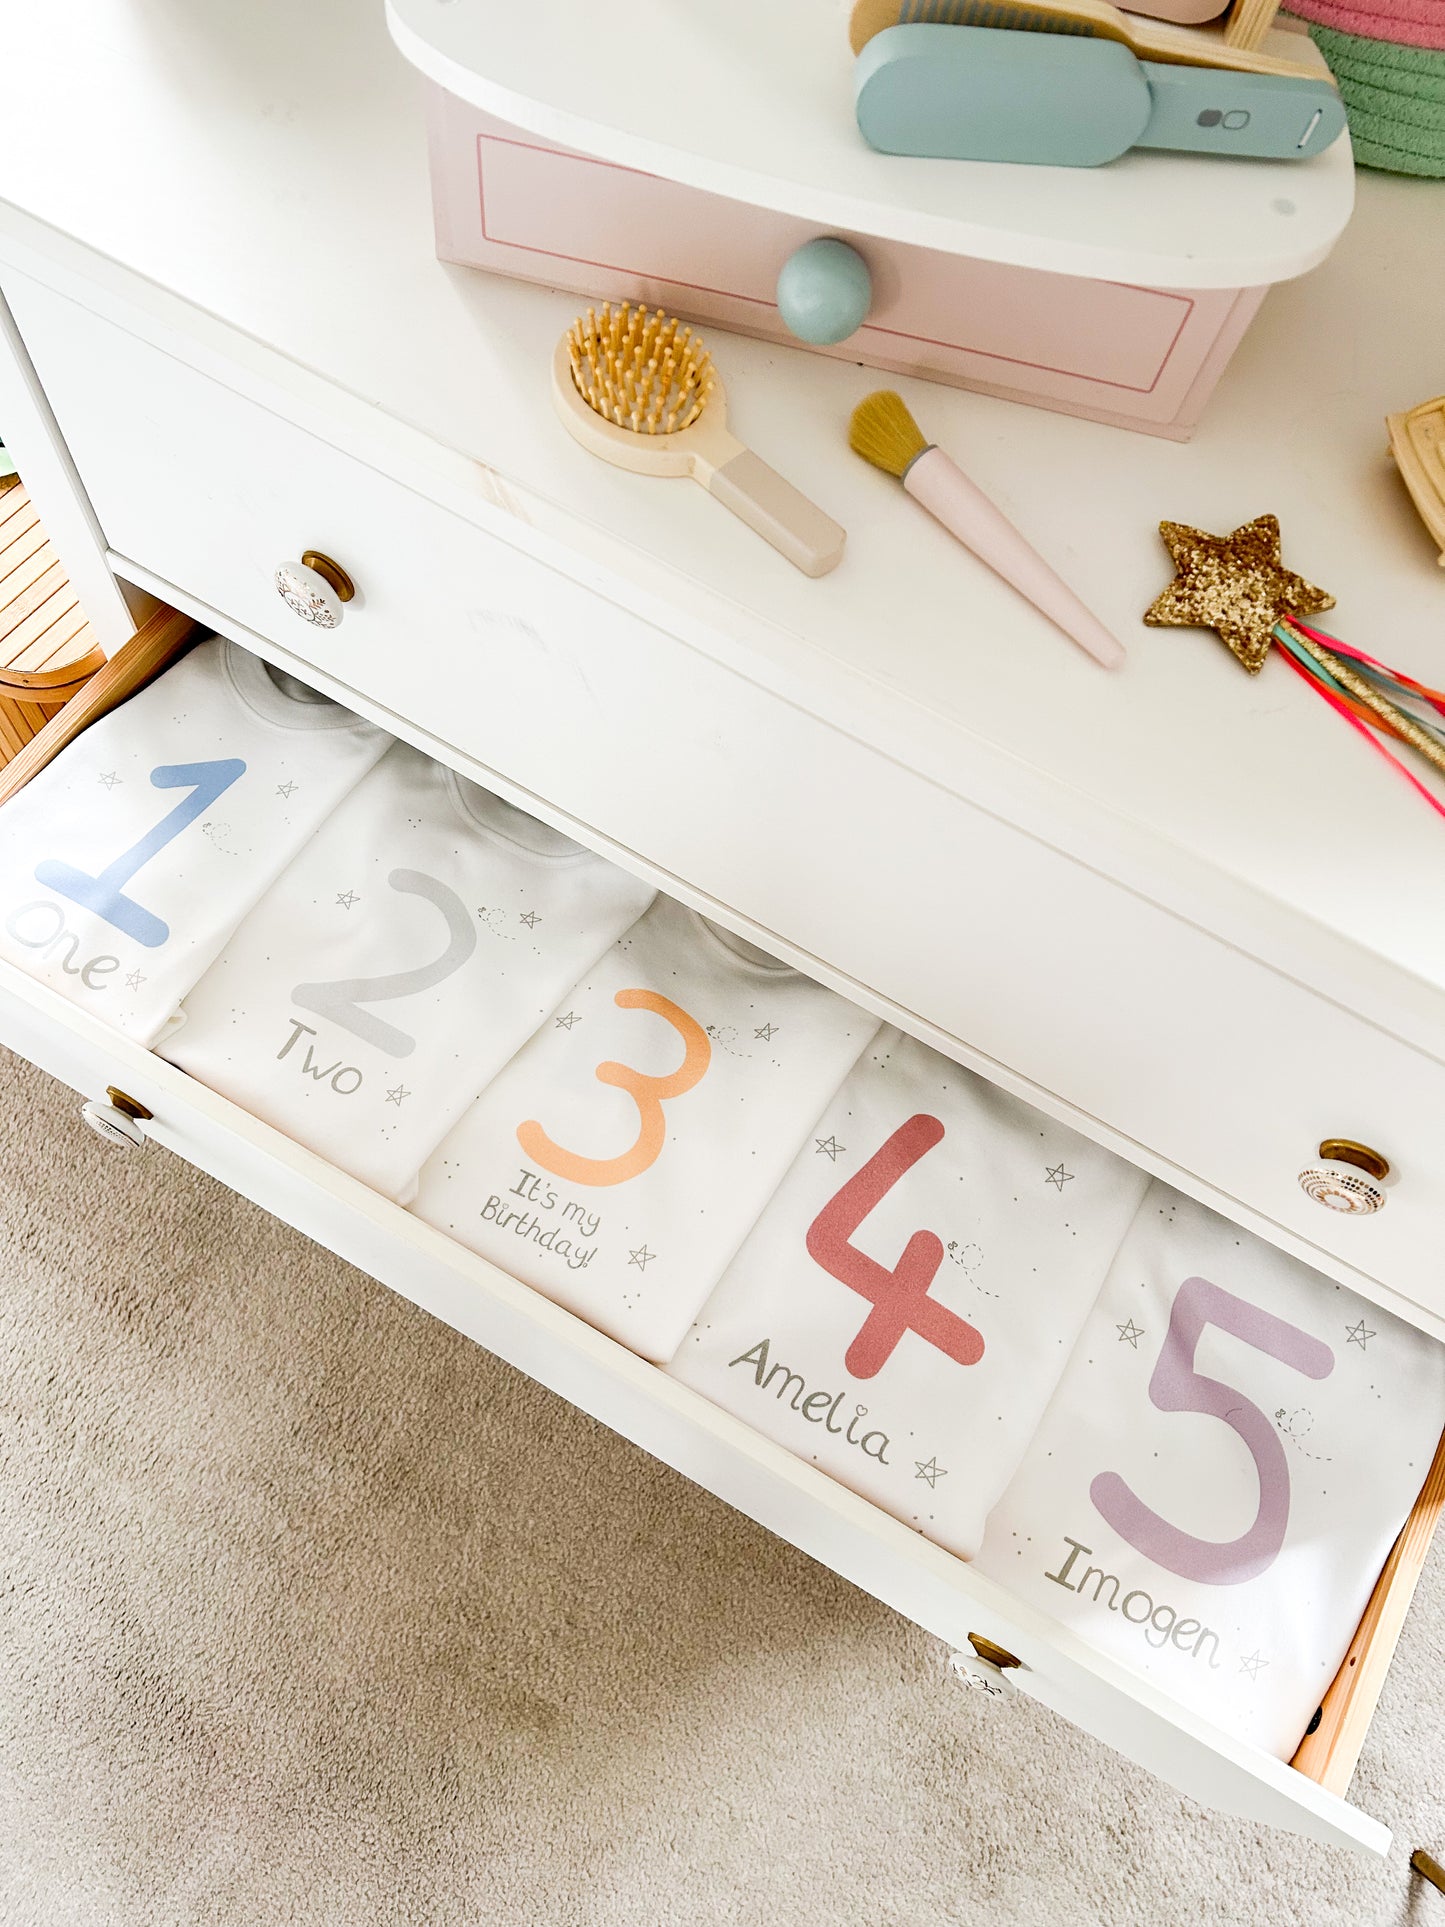 kids bedroom drawers open with five birthday tops inside with ages 1, 2, 3, 4 and 5 in bright rainbow colours and personalised with names and numbers